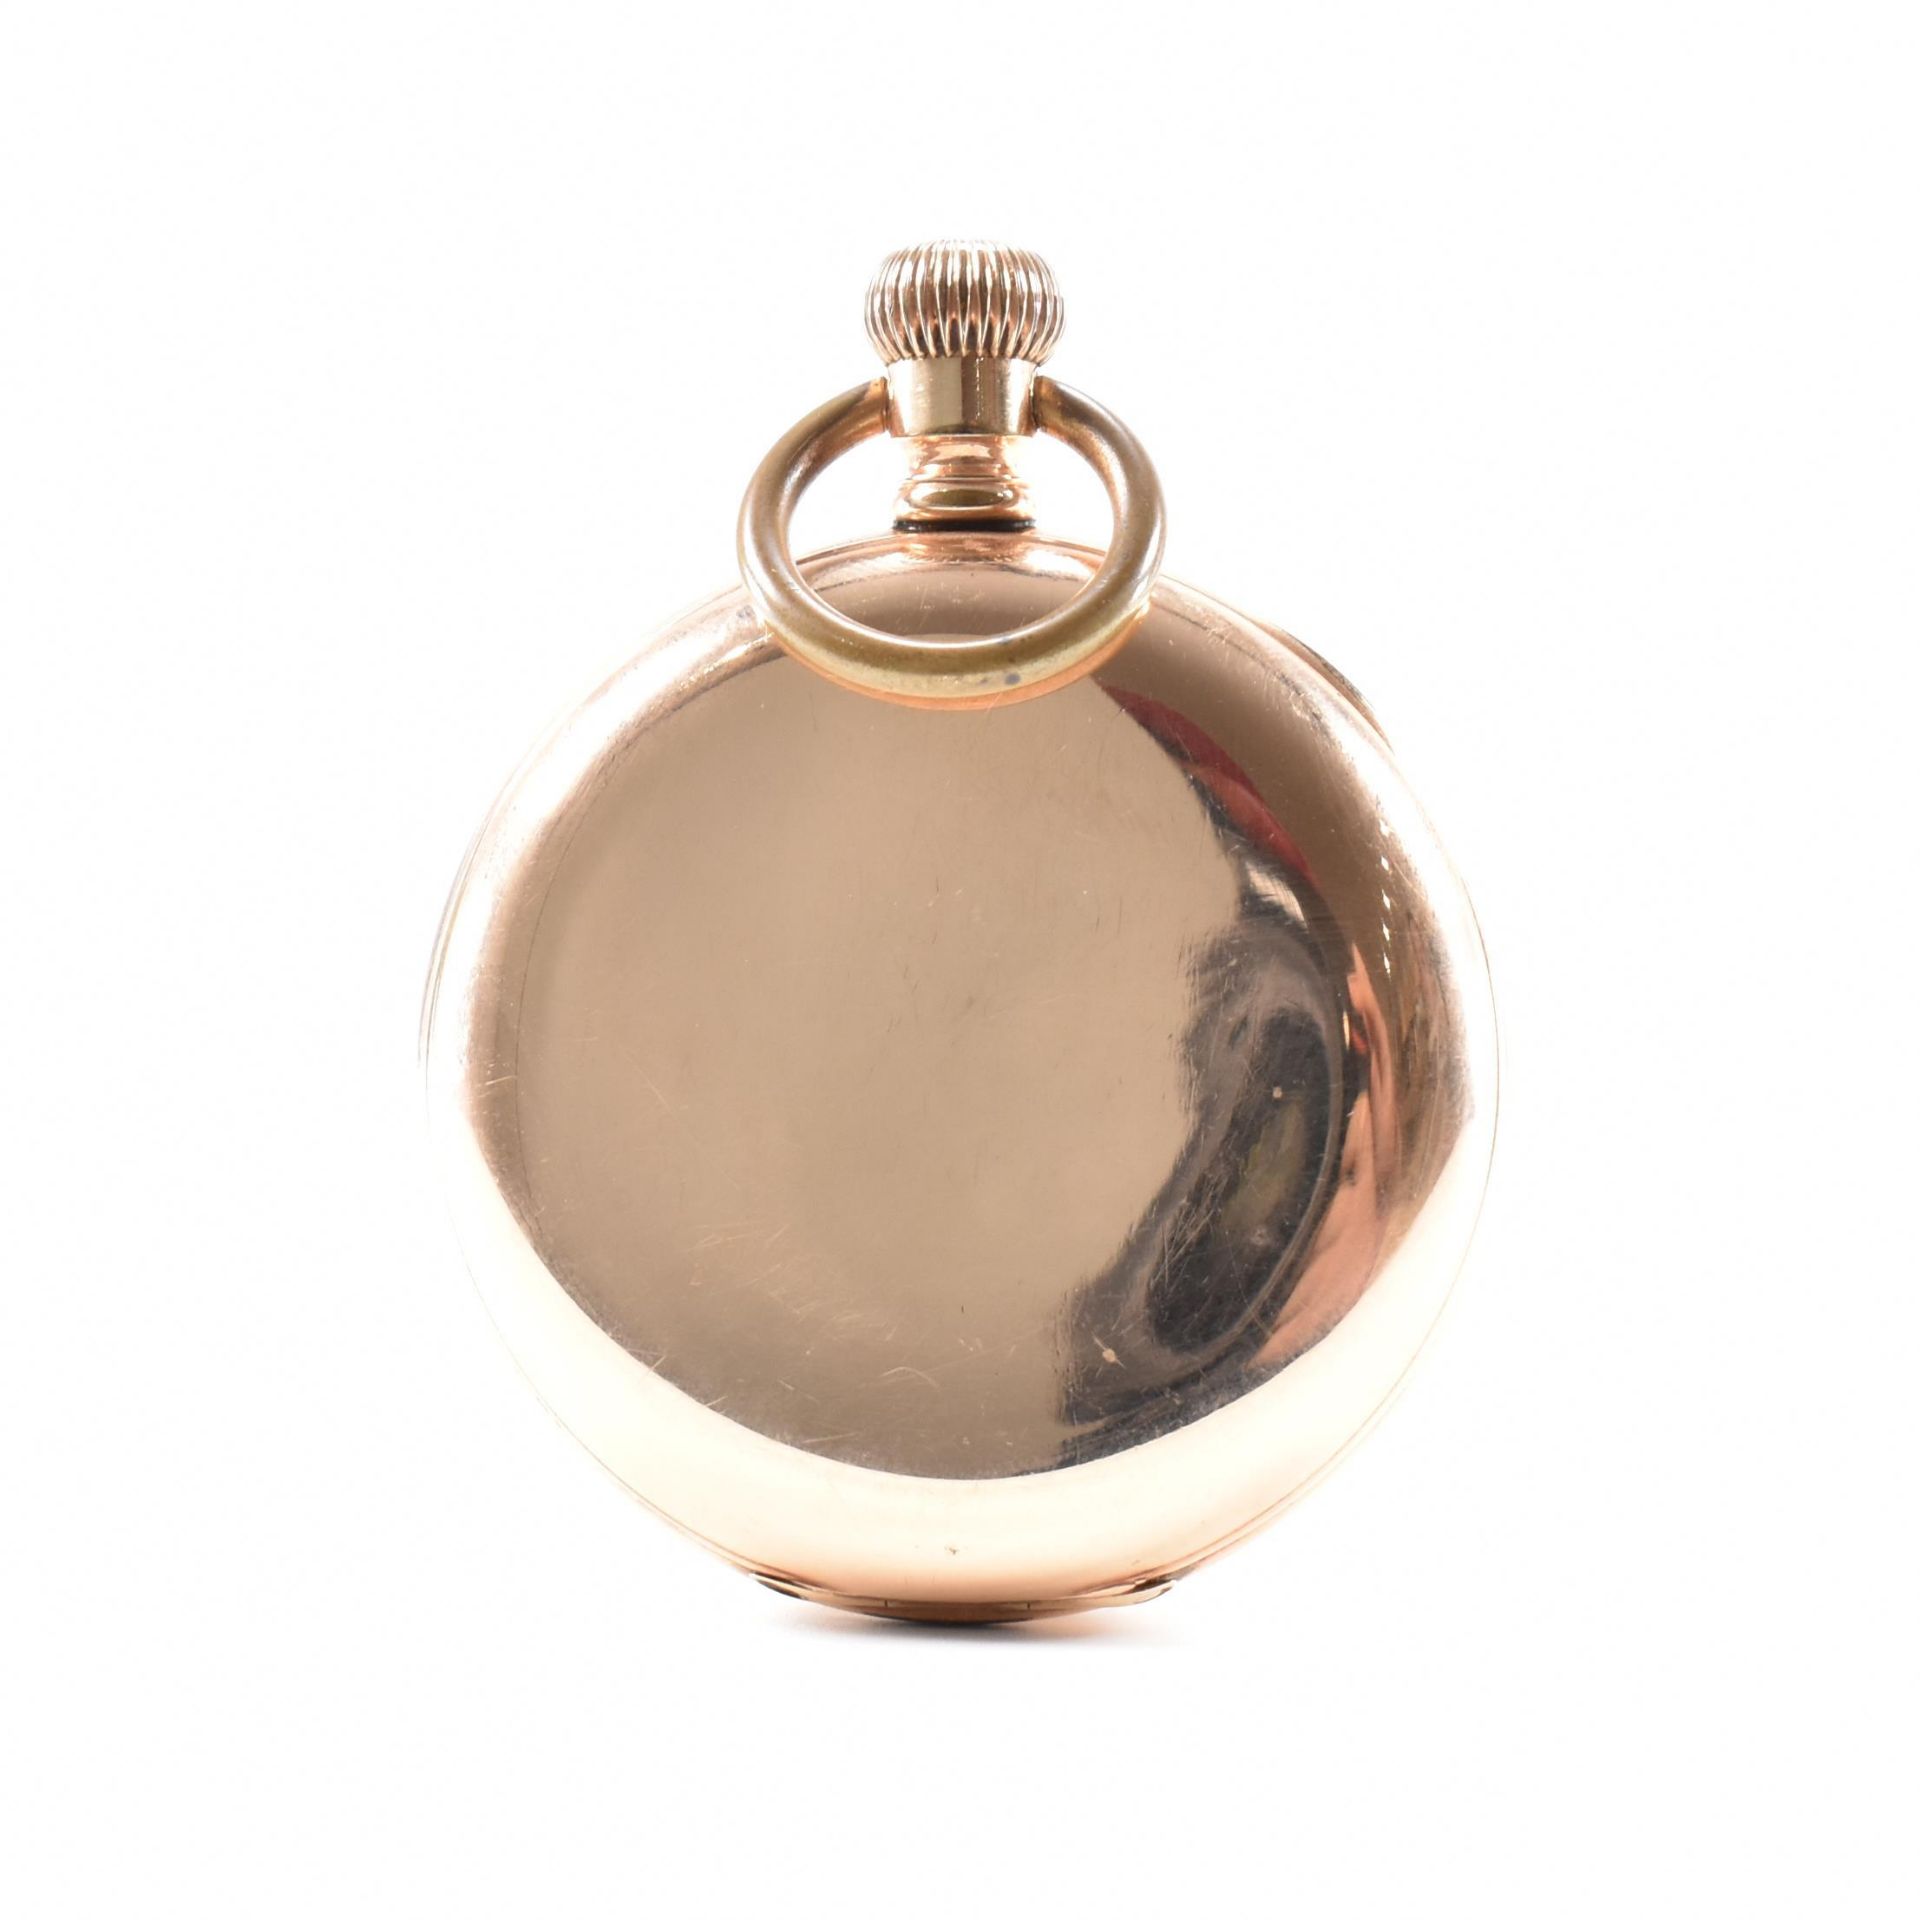 WALTHAM GOLD PLATED OPEN FACE POCKET WATCH - Image 2 of 7